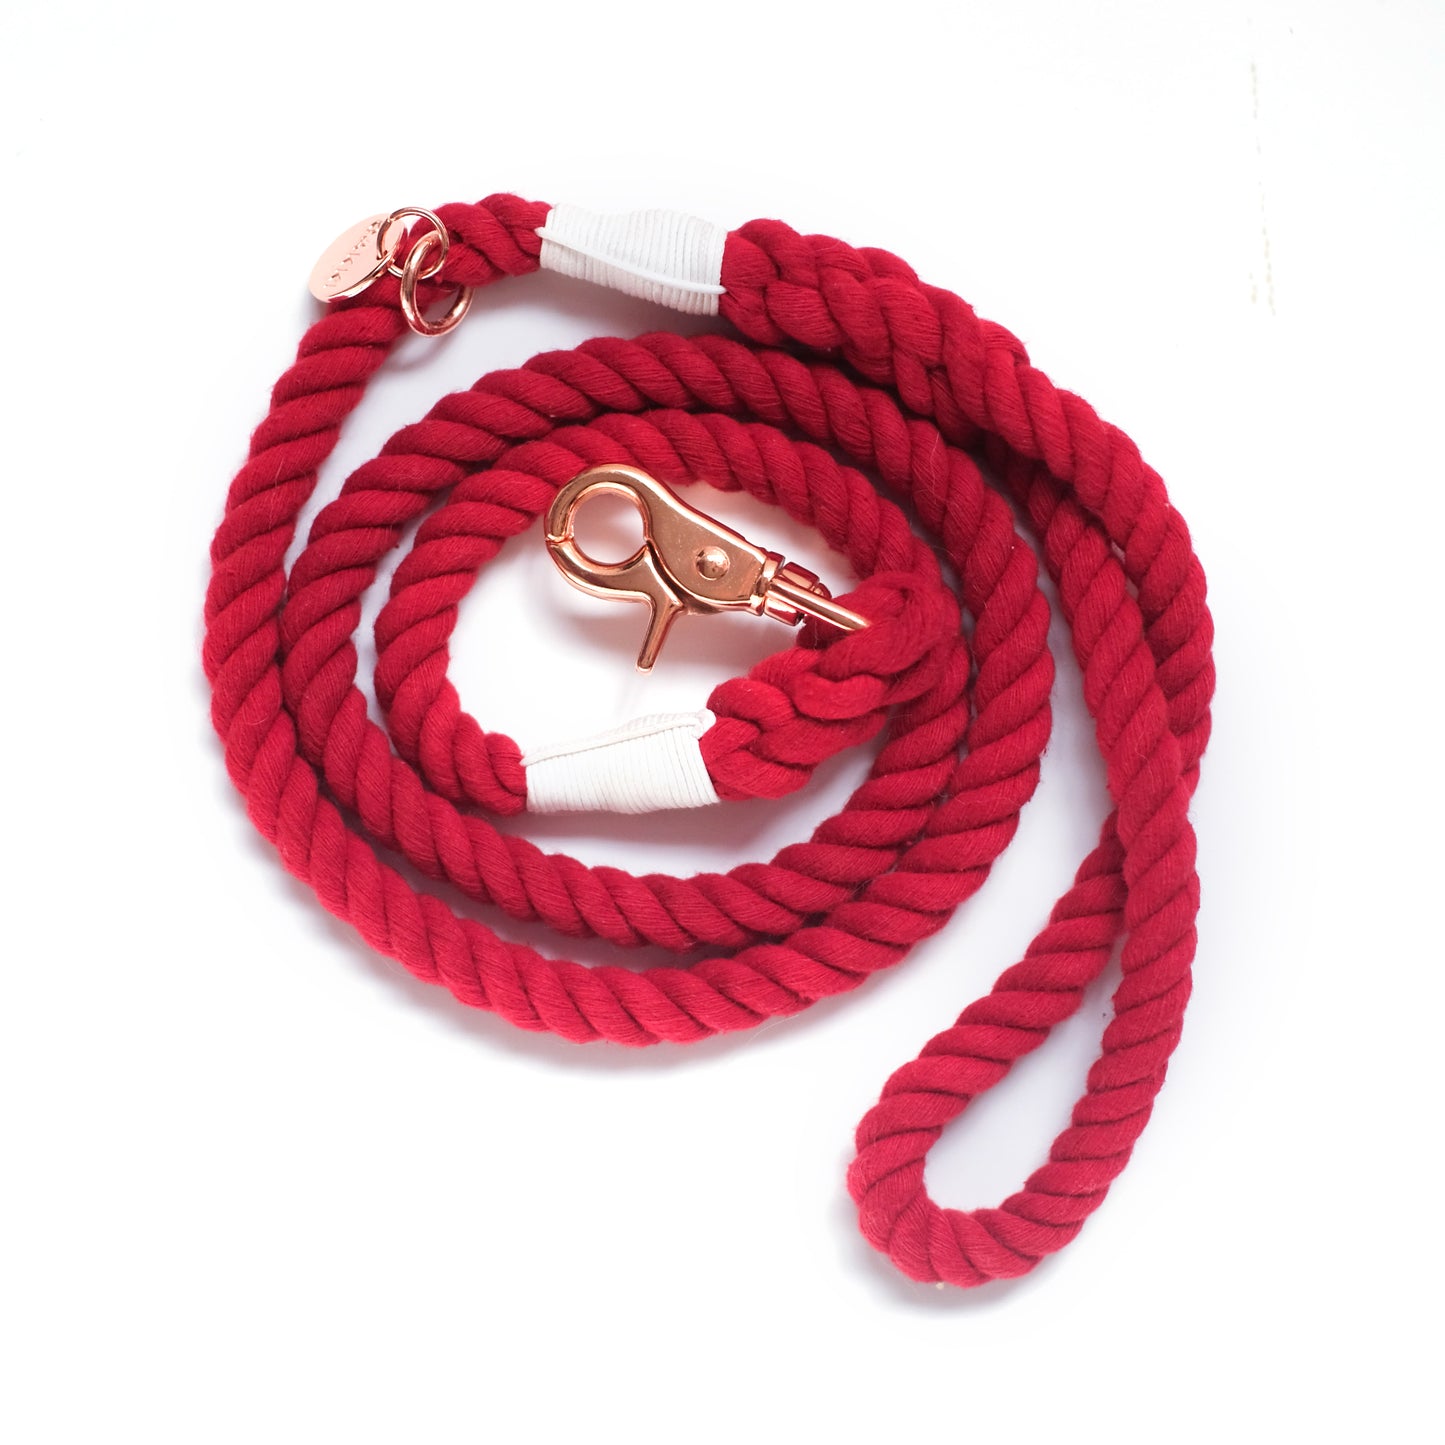 Blood Red Cotton Rope Leash